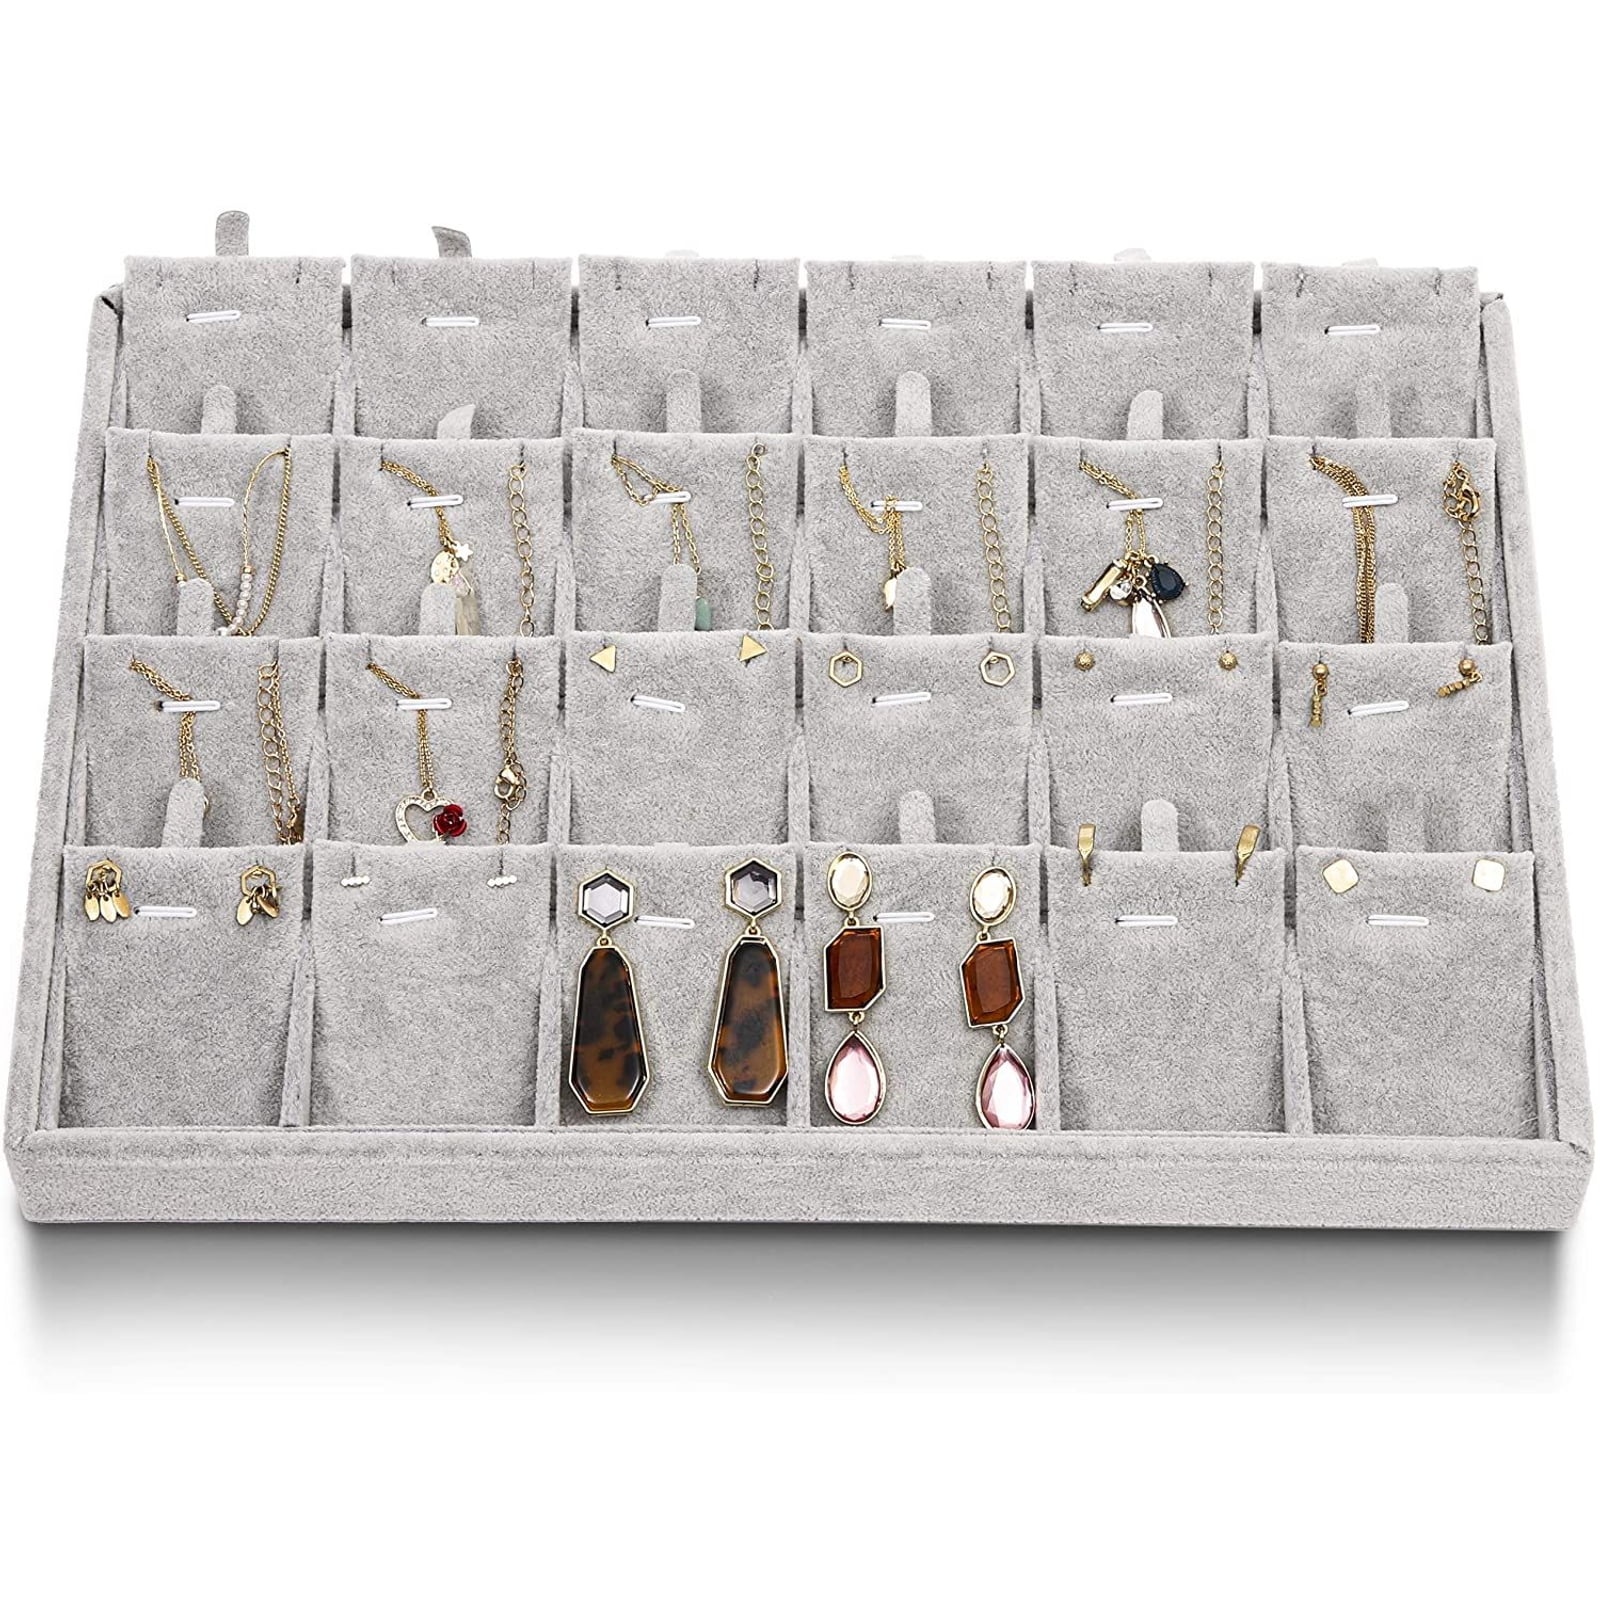 Bracelet & Necklace Display Cufflink Case Felt Earring Box Gray Stackable Accessories Storage Houseables Jewelry Tray Organizer 4 Pieces Velvet Ring Holder 13.8 W x 9.5 D Drawer Insert